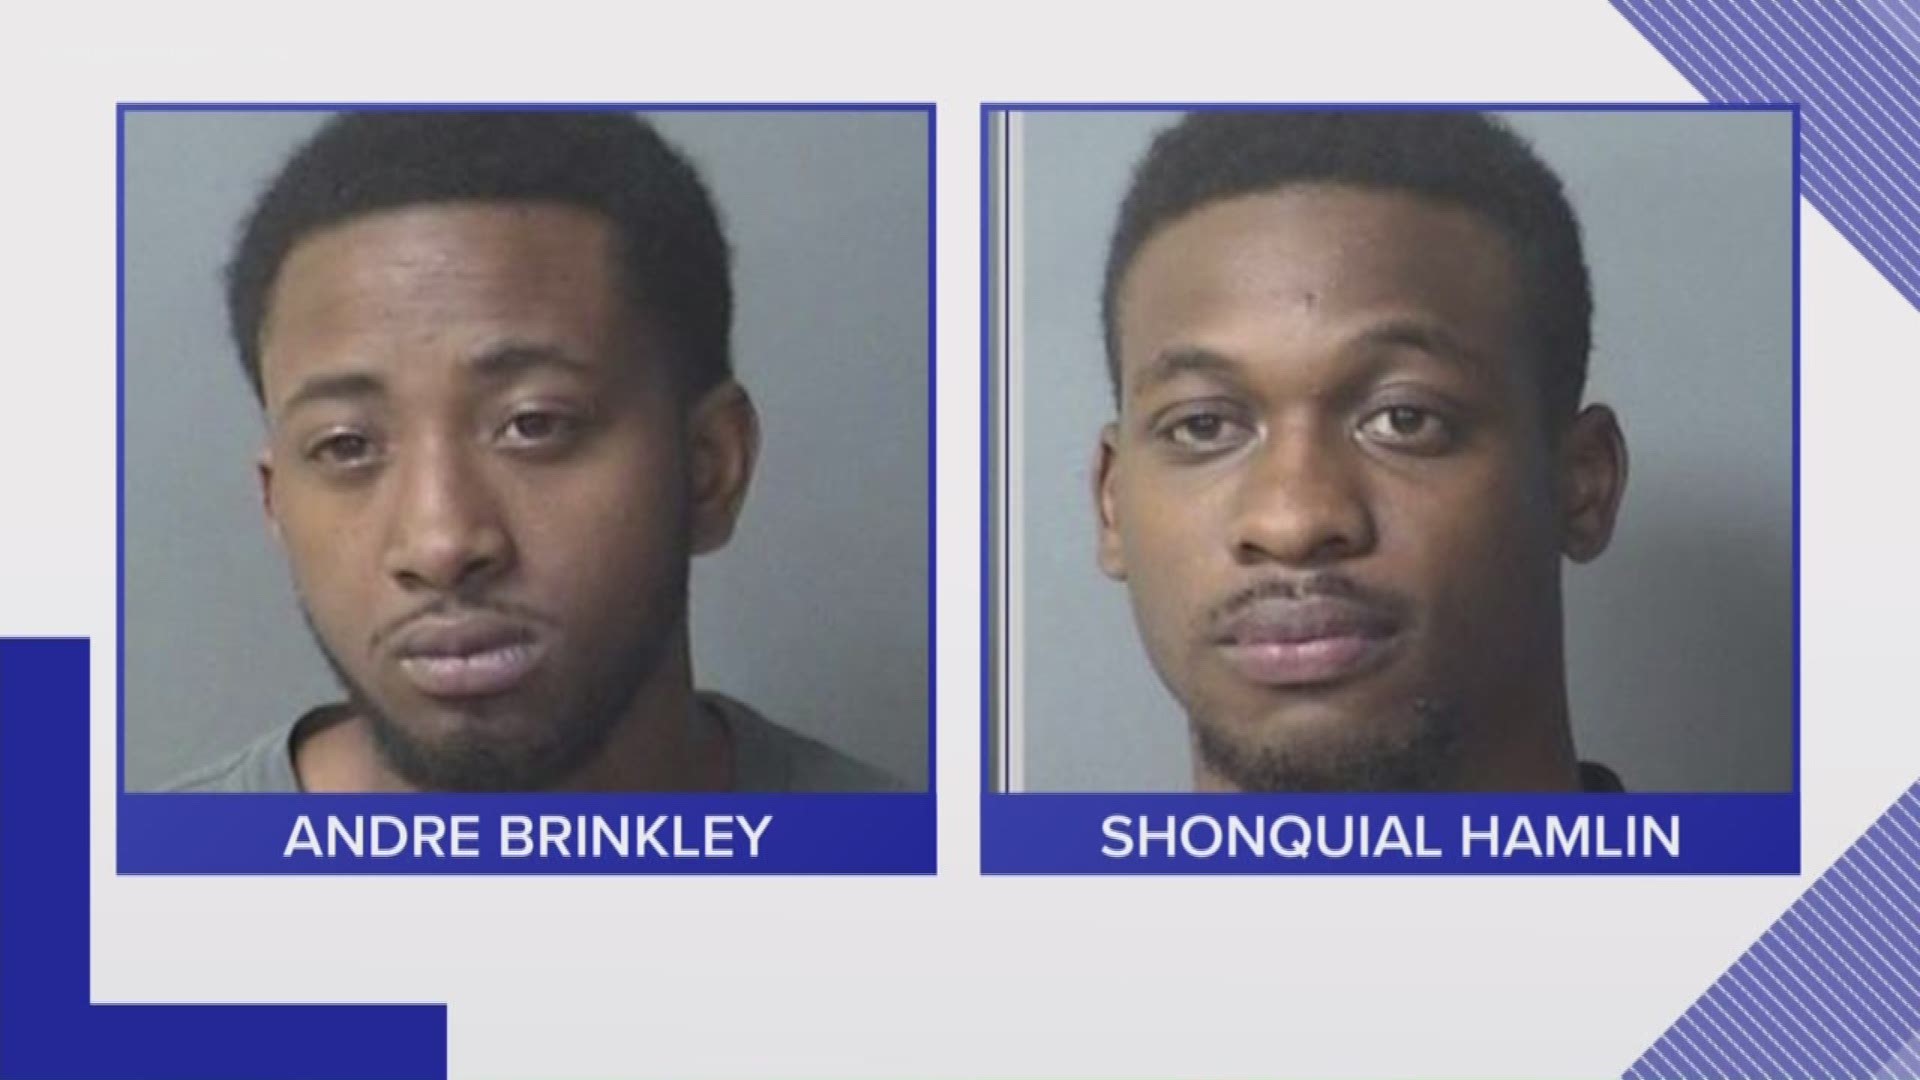 Police arrested Andre Brinkley and Shonquial Hamlin for the killing of Helena Stiglets. Officers said they robbed her outside of the Wawa where she worked.